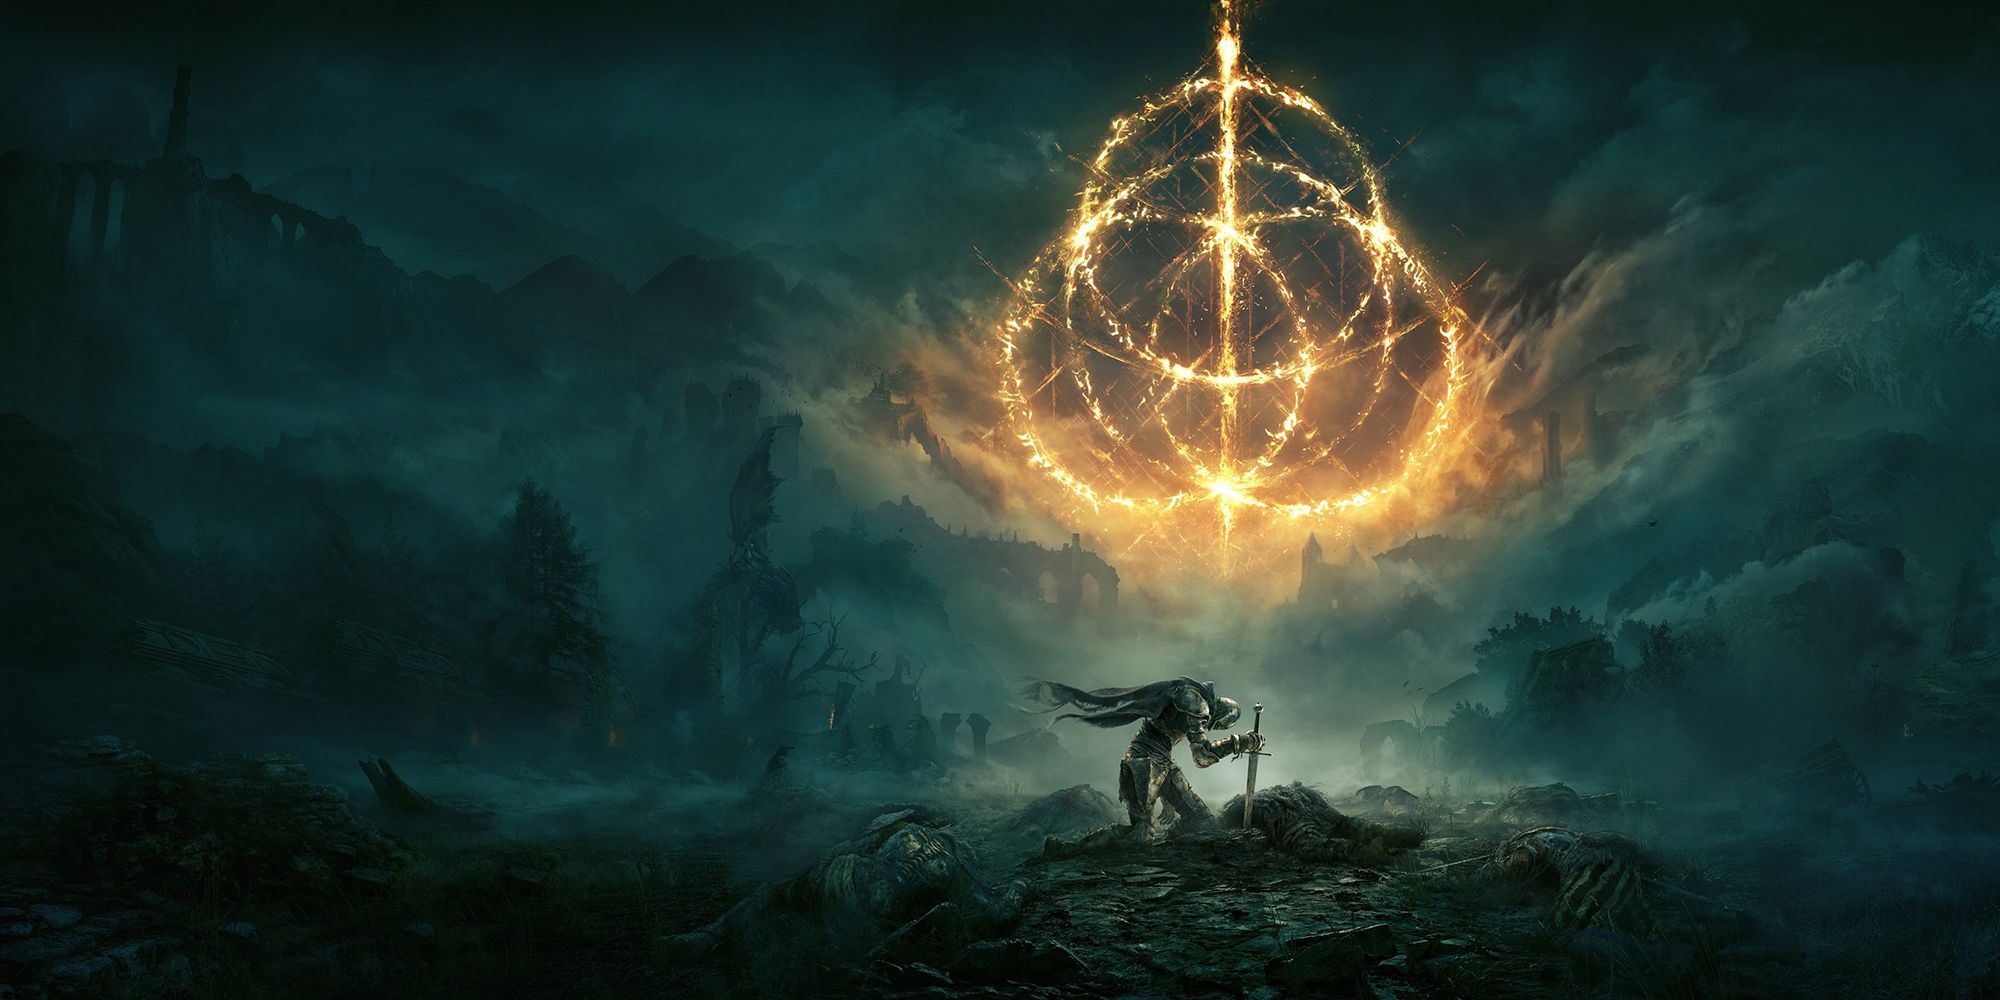 Elden Ring Promotional Art Showing Tarnished And The Elden Ring Rune Itself